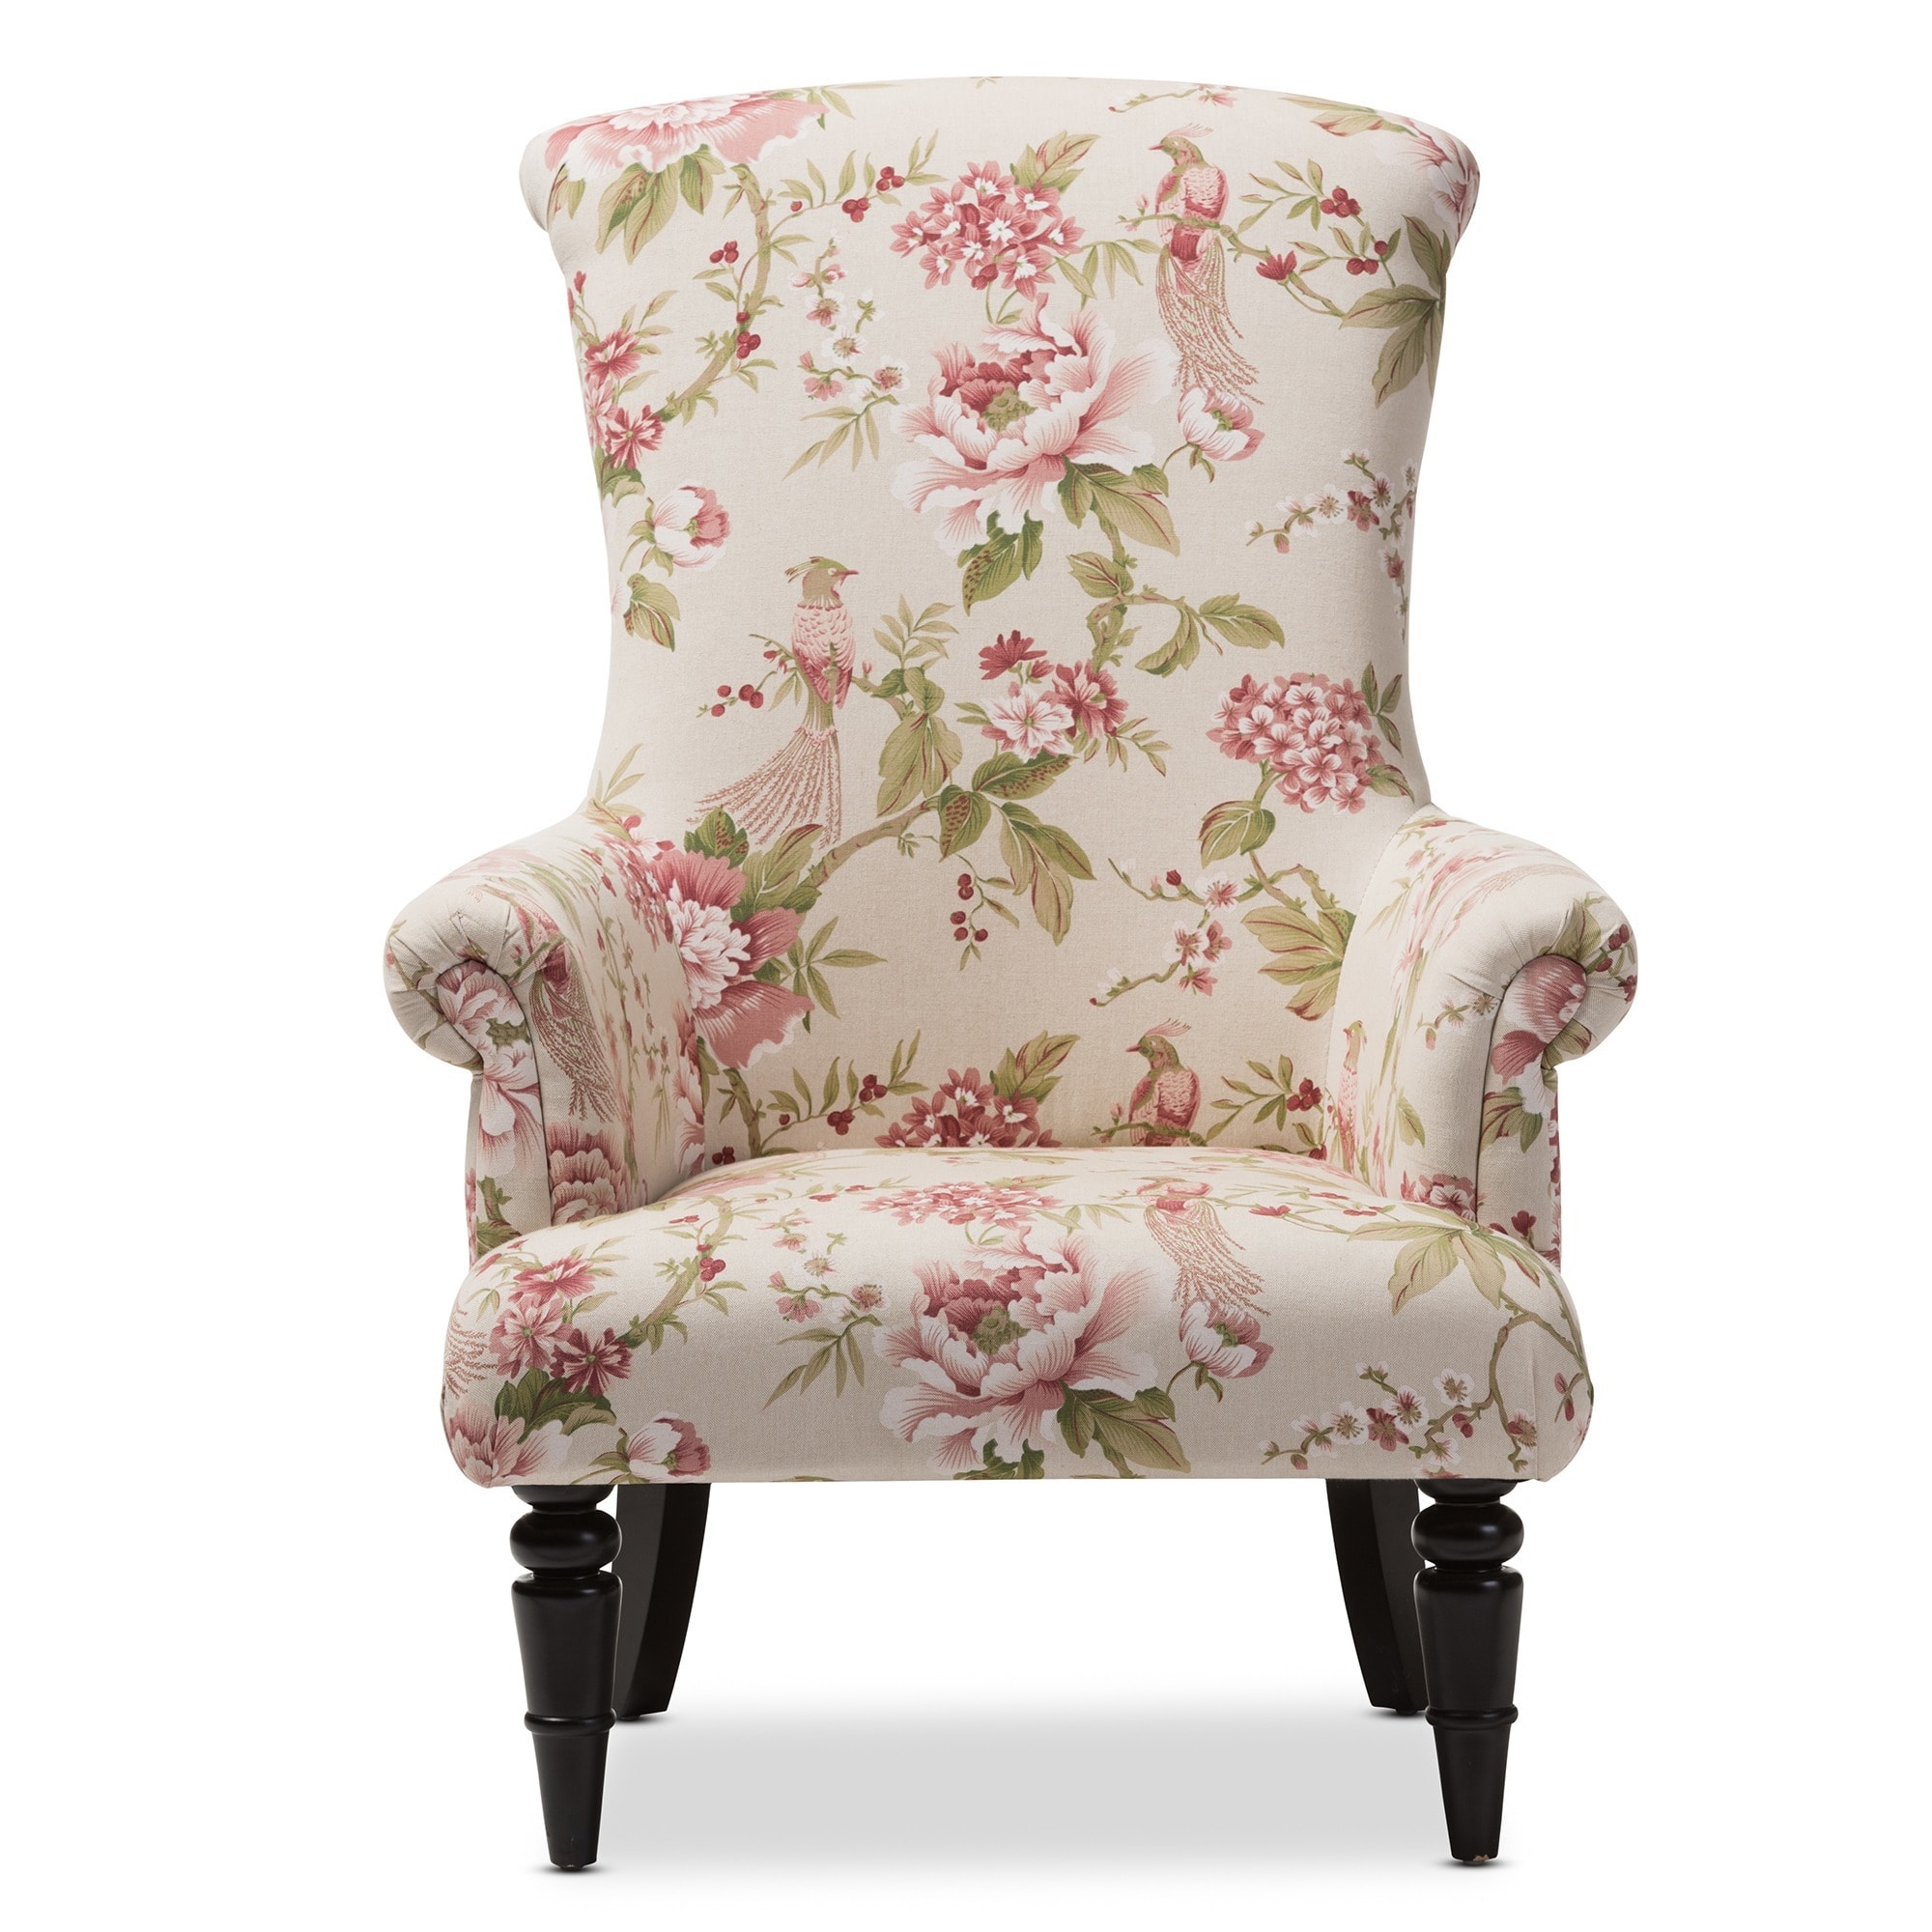 Buy Living Room Chairs Online at Overstock.com | Our Best Living Room